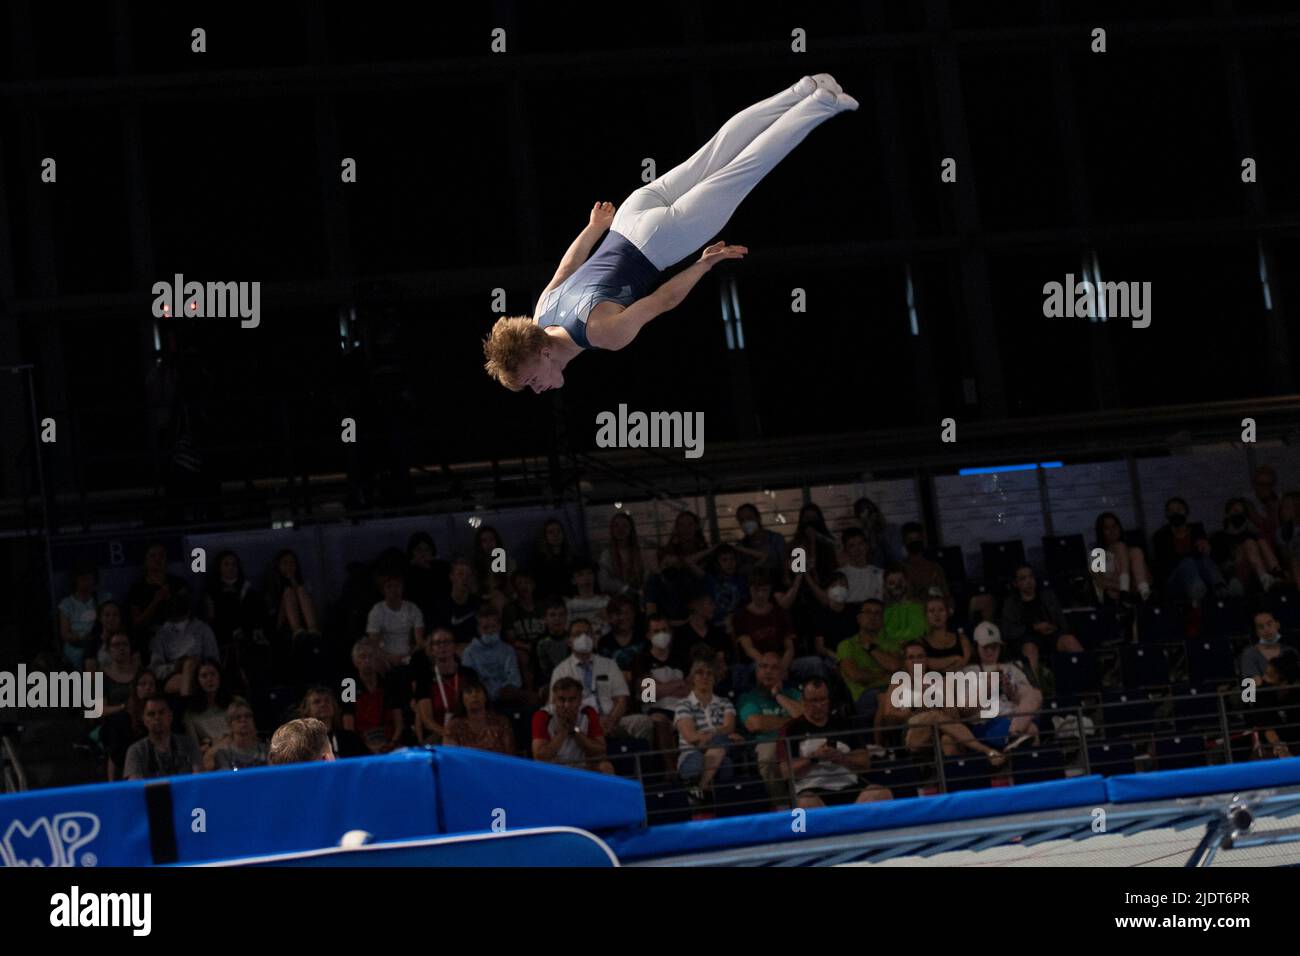 Berlin, Germany. 23rd June, 2022. Gymnastics/Trampoline: German  Championships, Philipp Wolfrum performs his trampoline freestyle in the  Max-Schmeling-Halle. Credit: Christophe Gateau/dpa/Alamy Live News Stock  Photo - Alamy